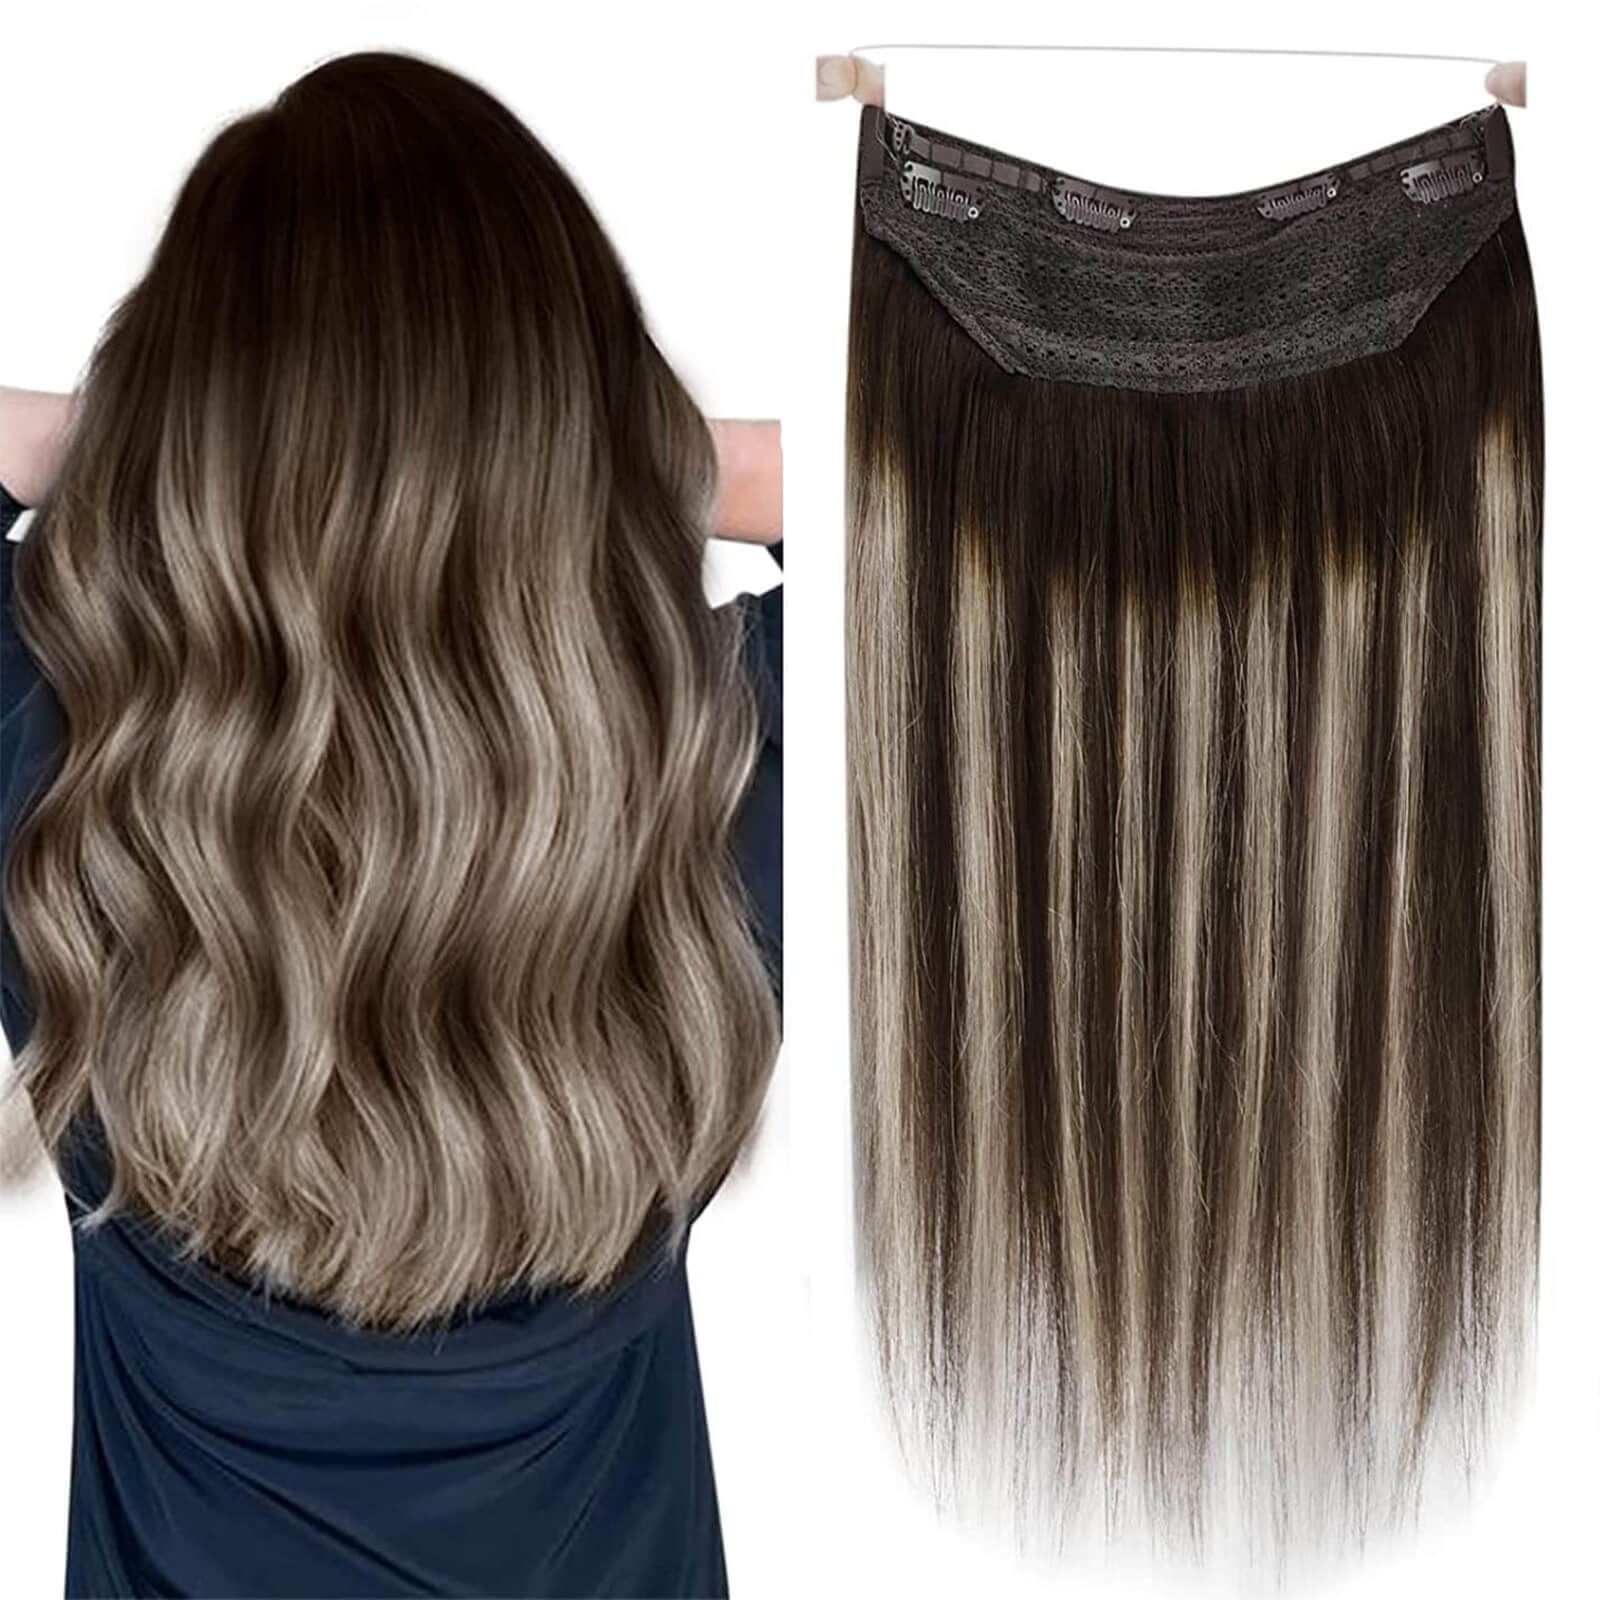 Halo Hair Extensions Balayage Dark Brown with Ash Blonde with